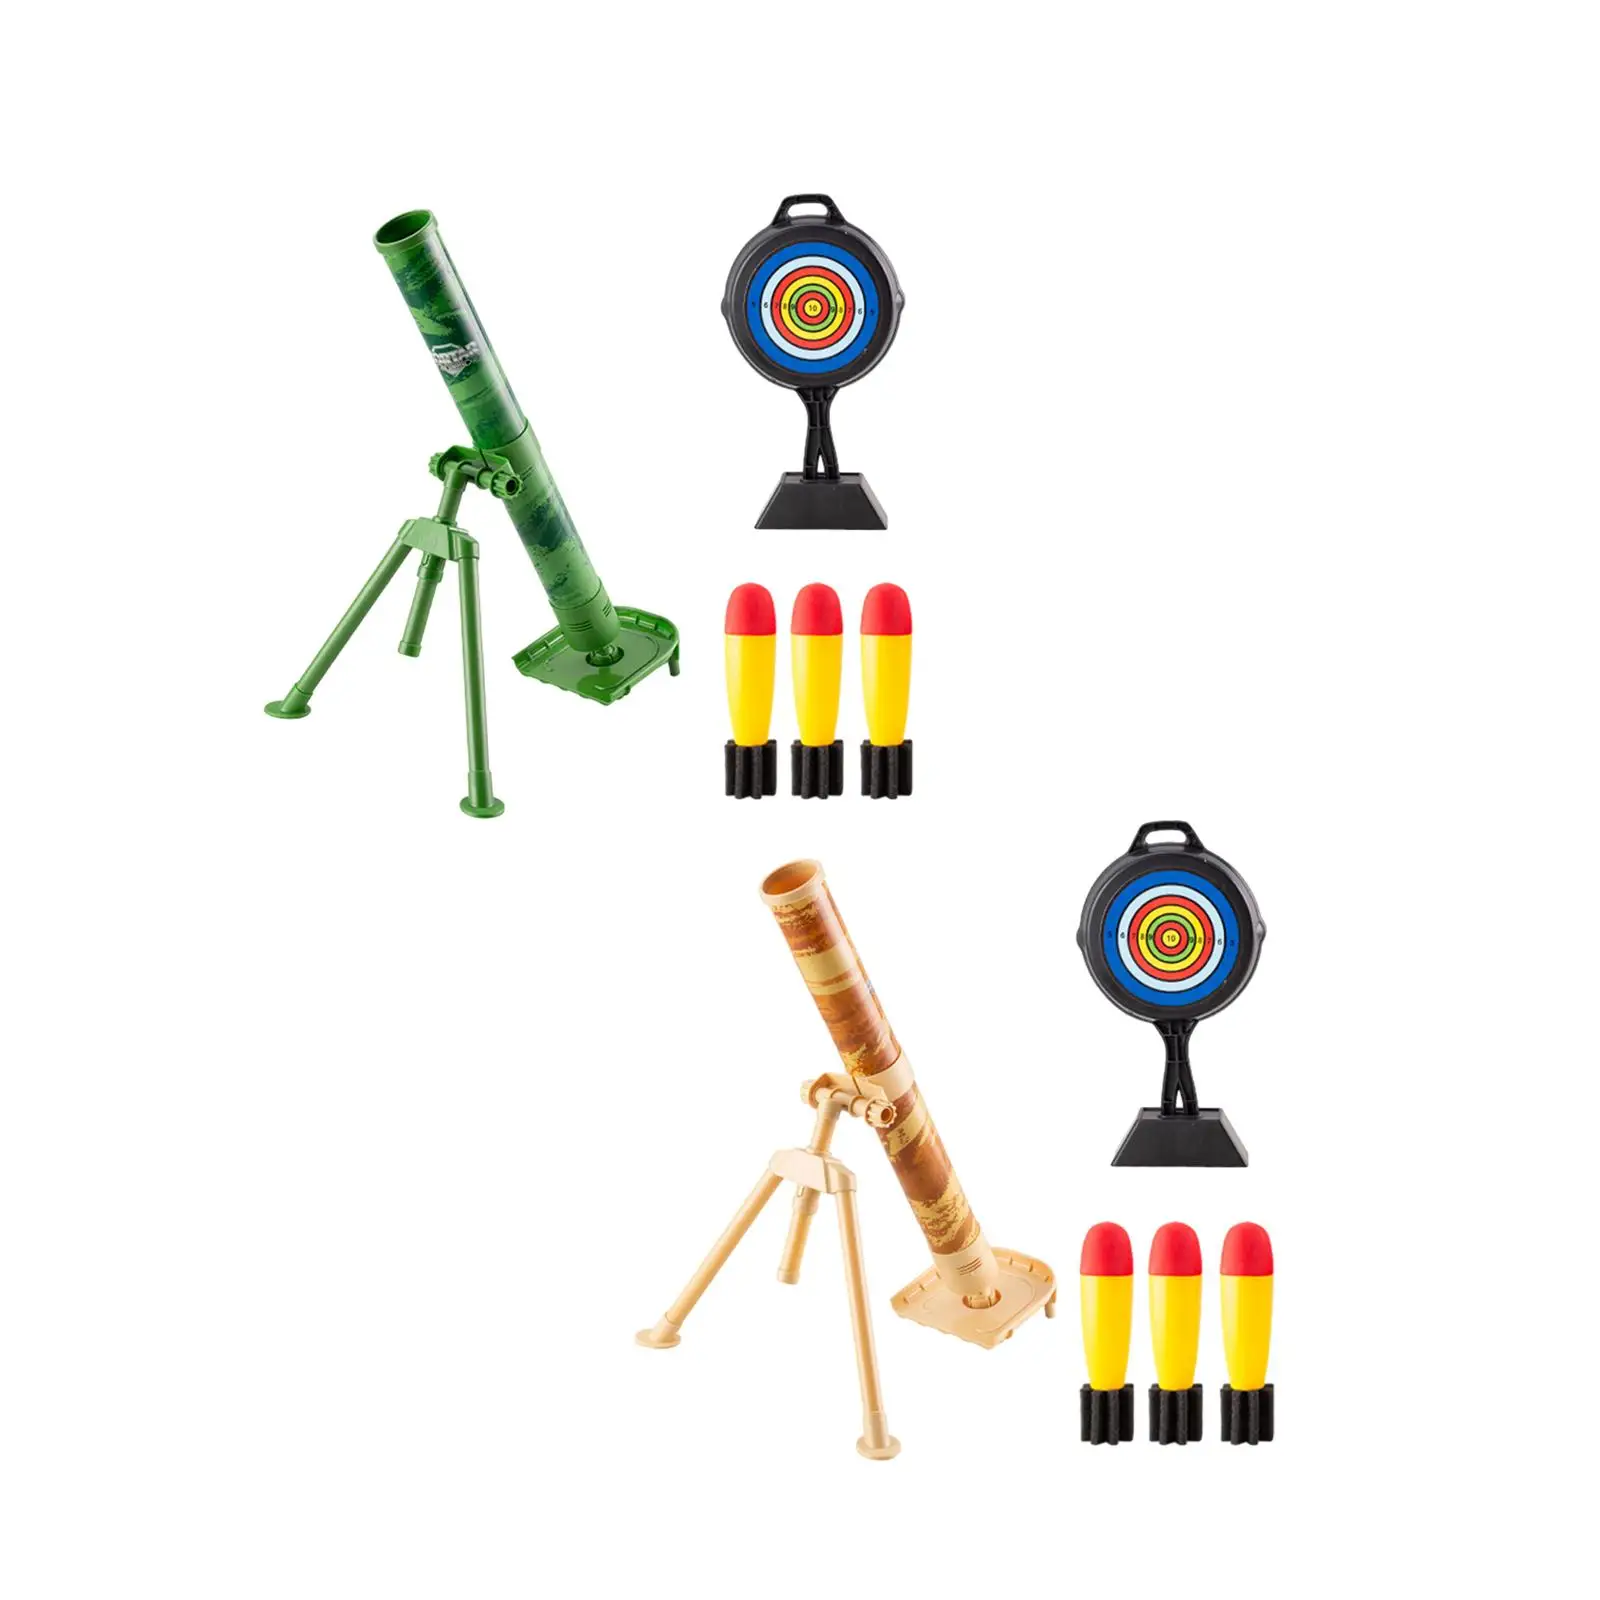 Mortar Launcher Toy Set Professional with Sound Great for Outdoor Game for Boys and Girls Kid Festival Present